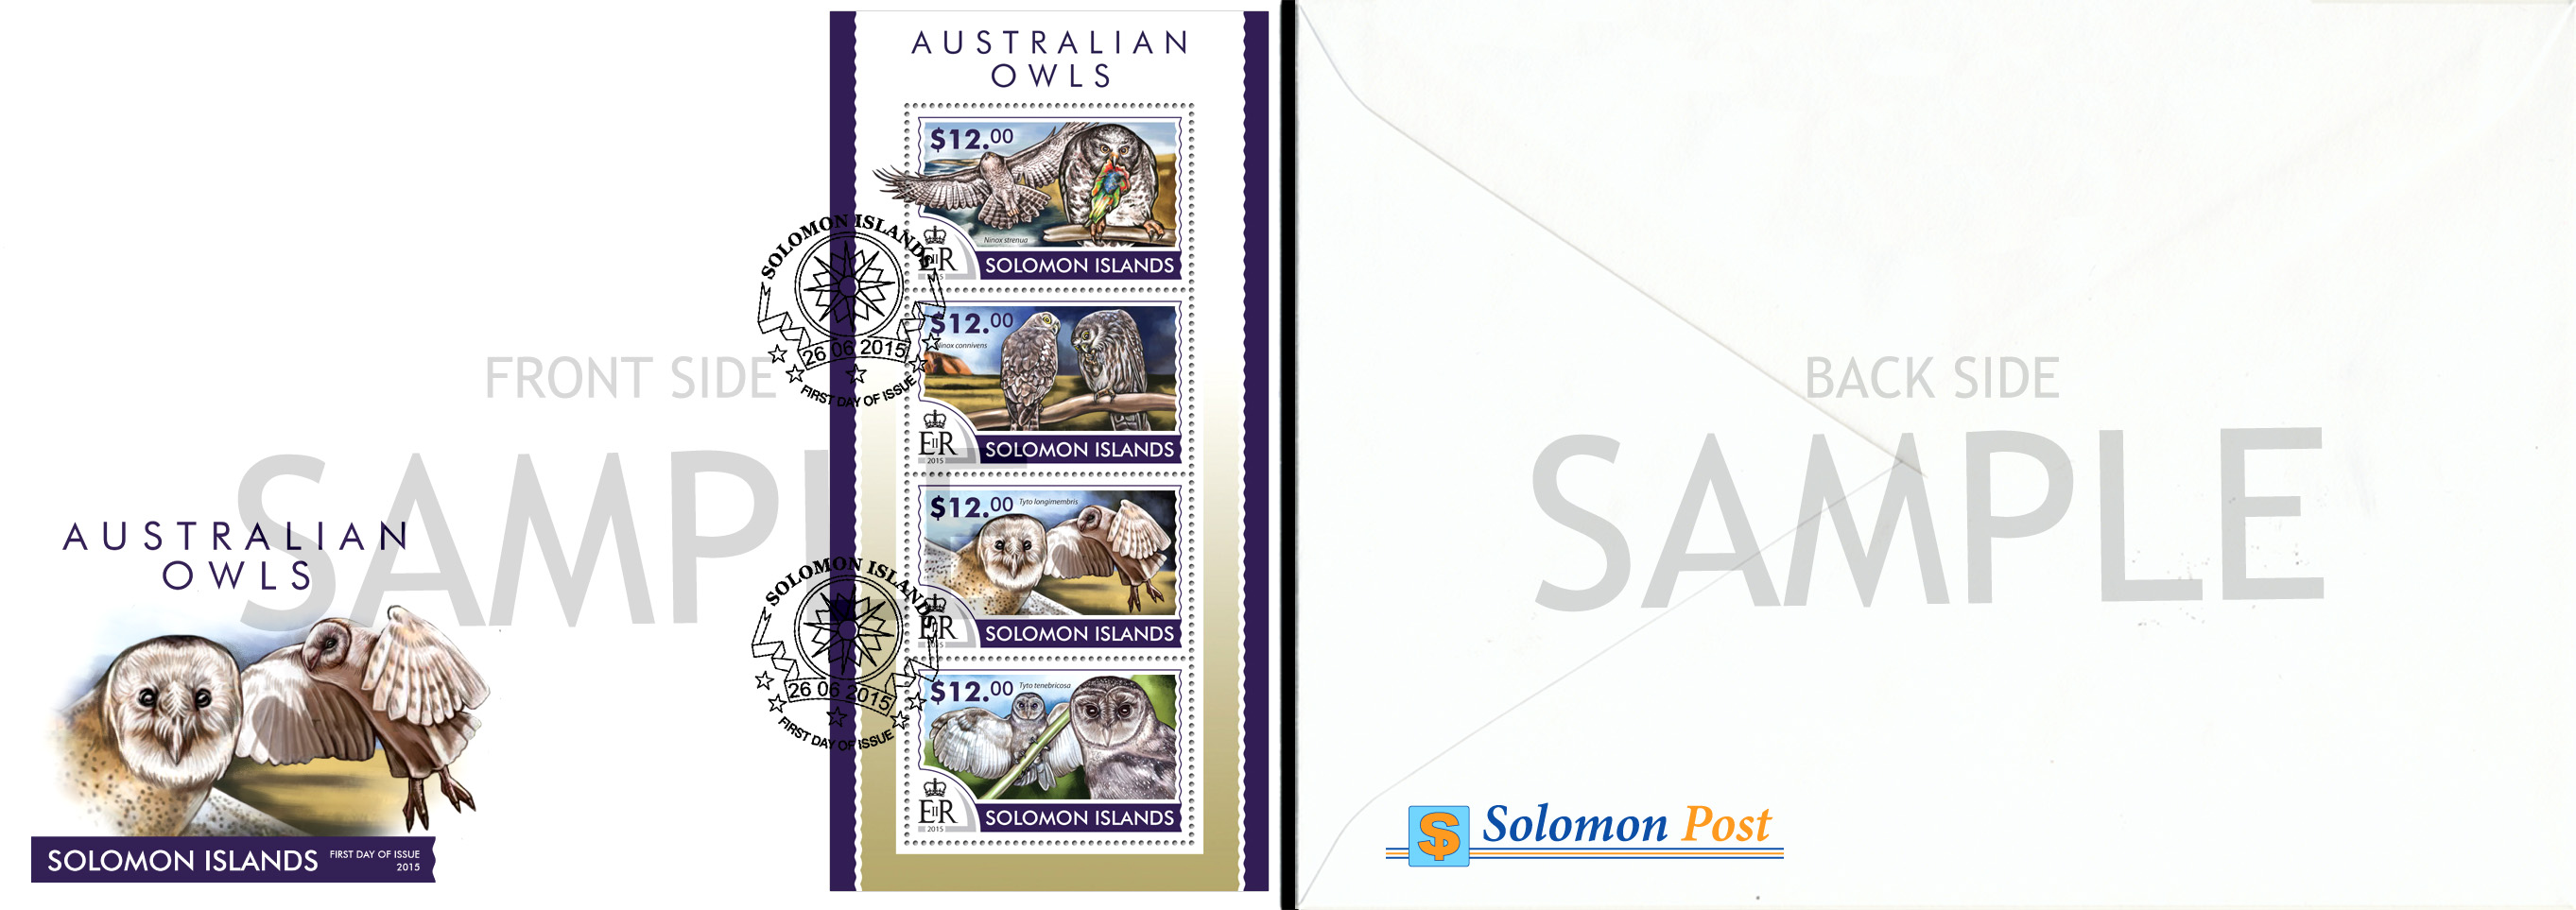 FDC Sample - Issue of Solomon islands postage stamps